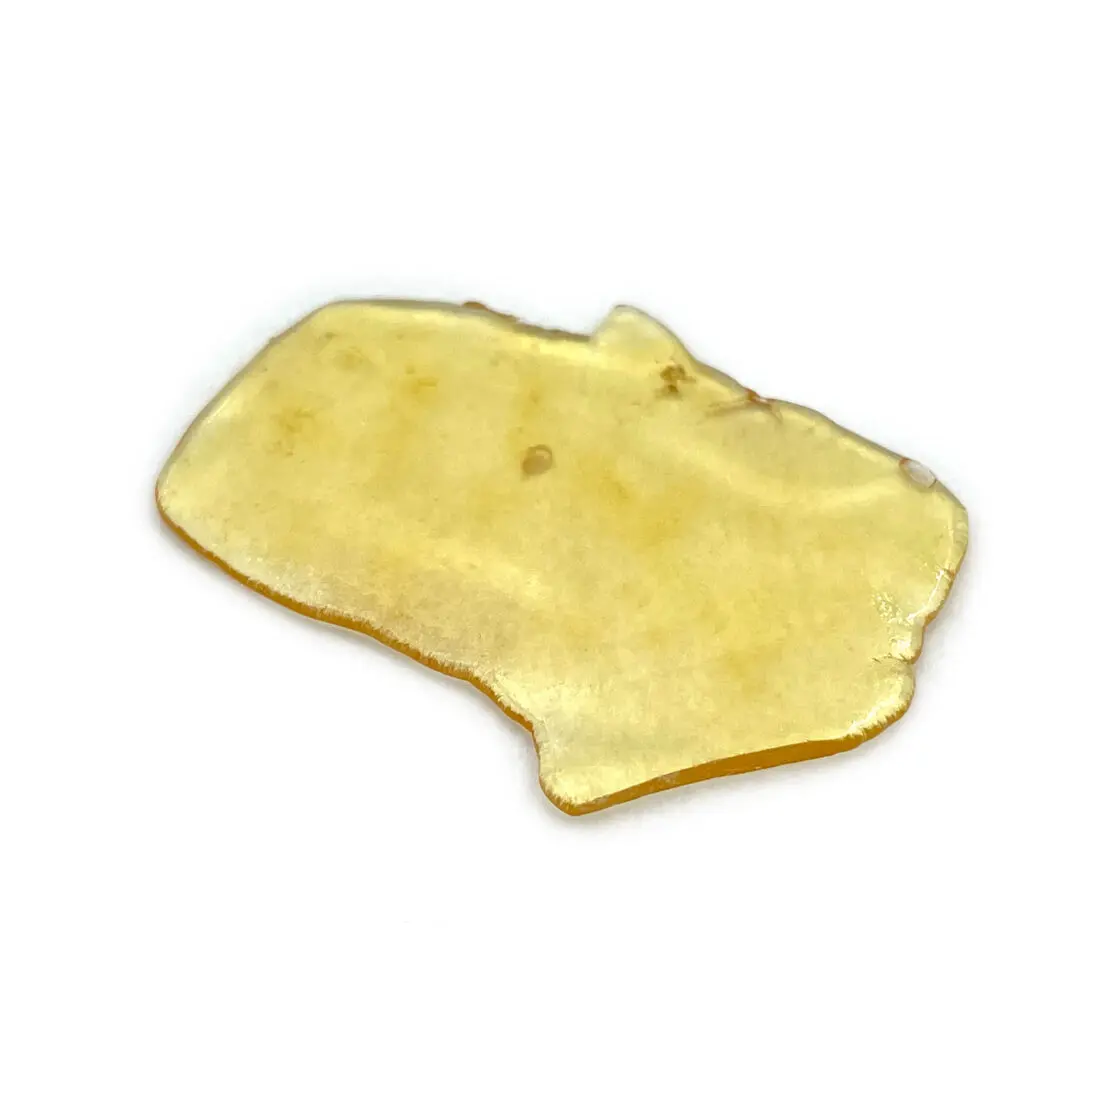 Golden Monkey Extracts – Shatter